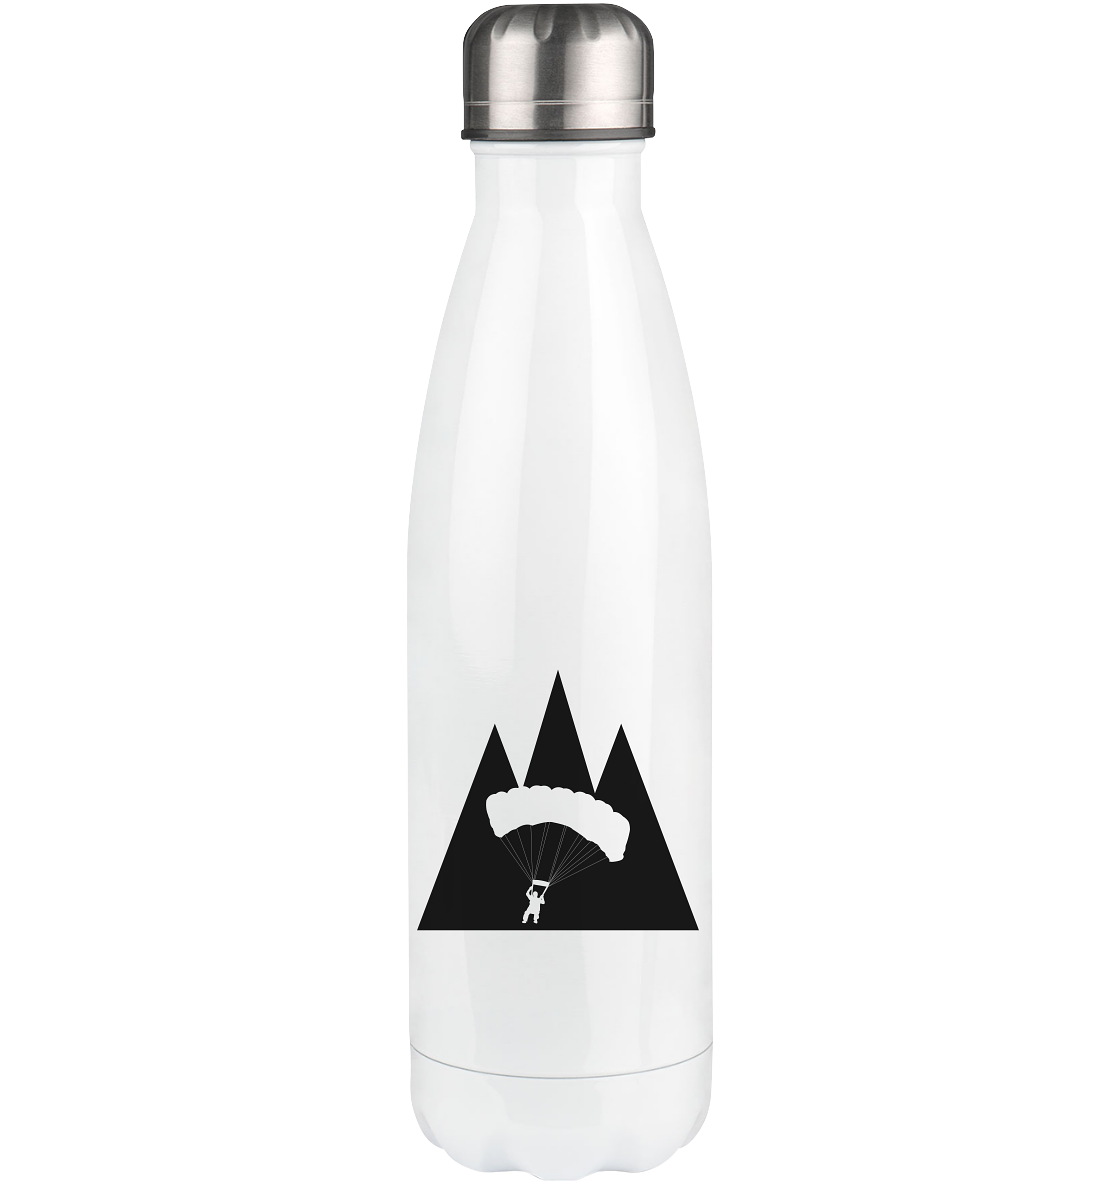 Triangle Mountain and Paragliding - Edelstahl Thermosflasche berge 500ml